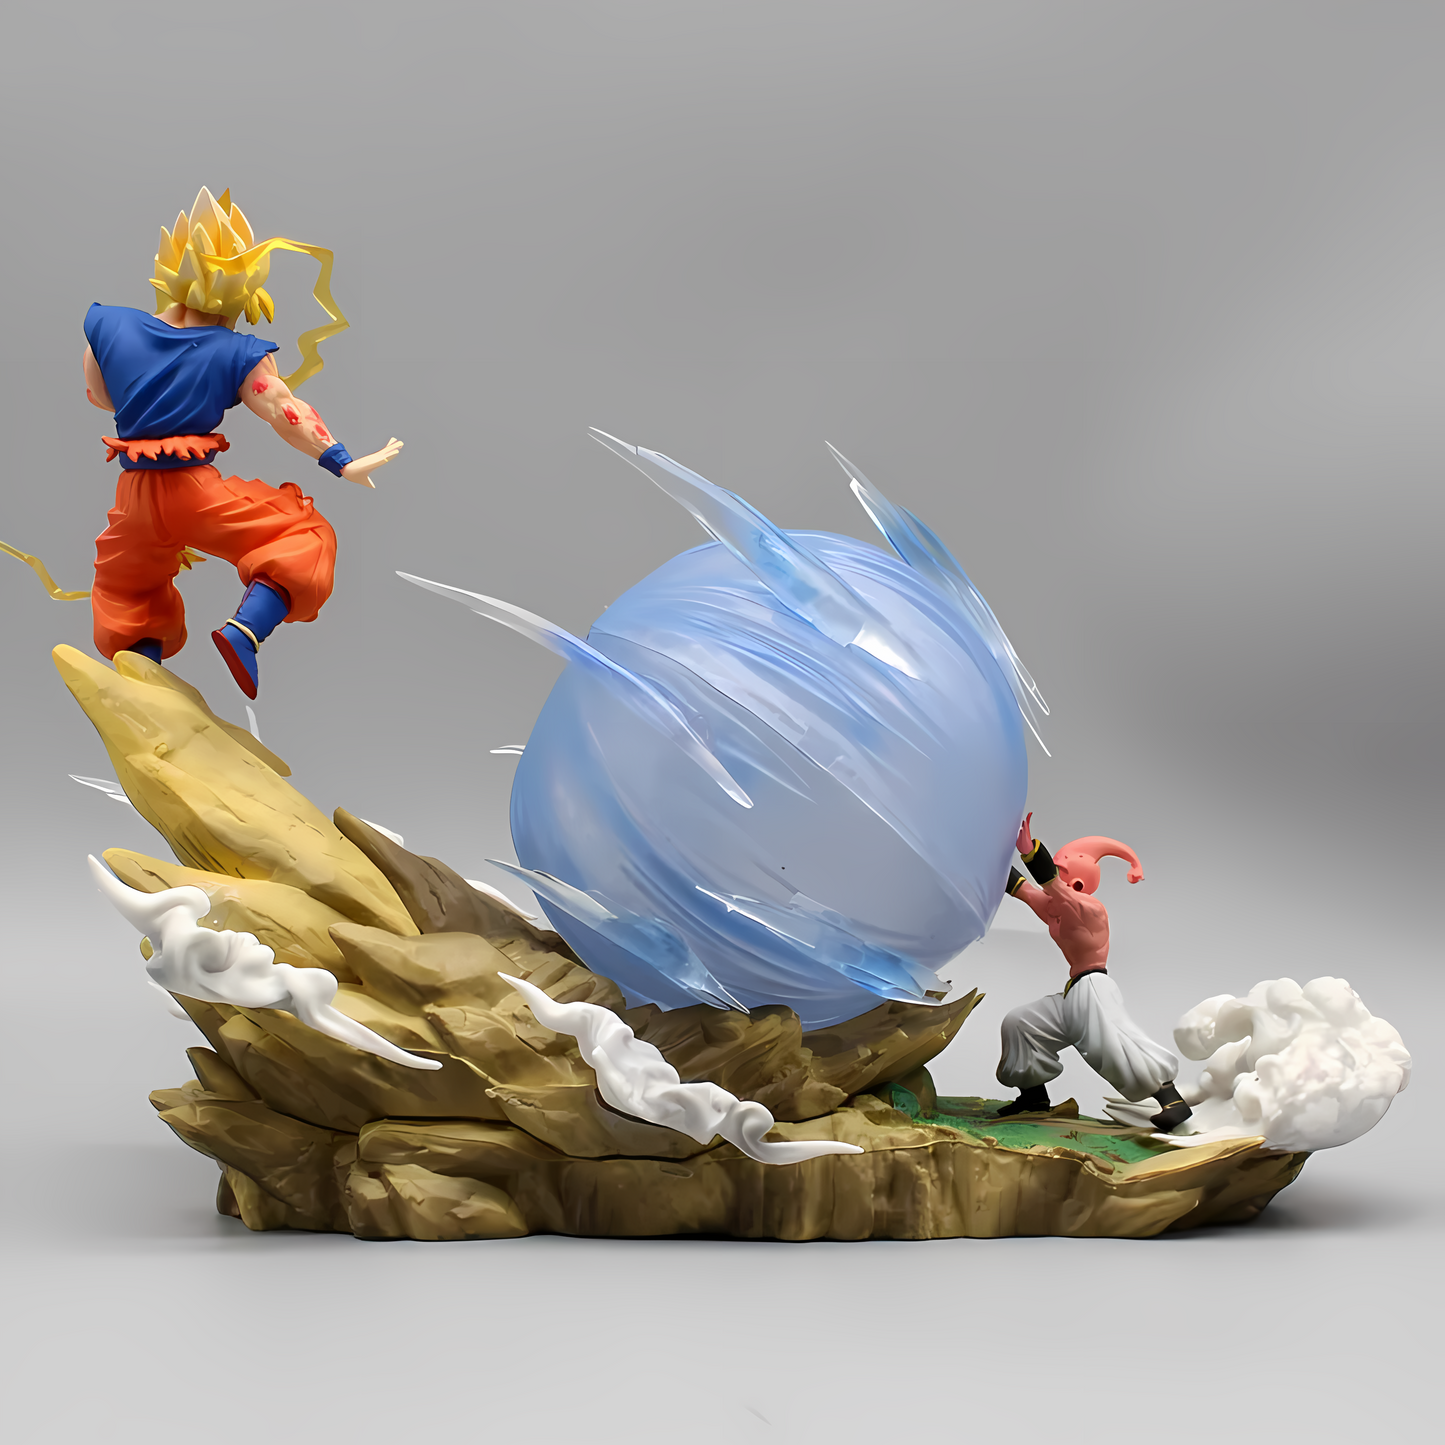 Collectible figure scene with Super Saiyan Goku mid-leap over a swirling blue energy ball launched by a concentrated Majin Buu on a rugged terrain base.